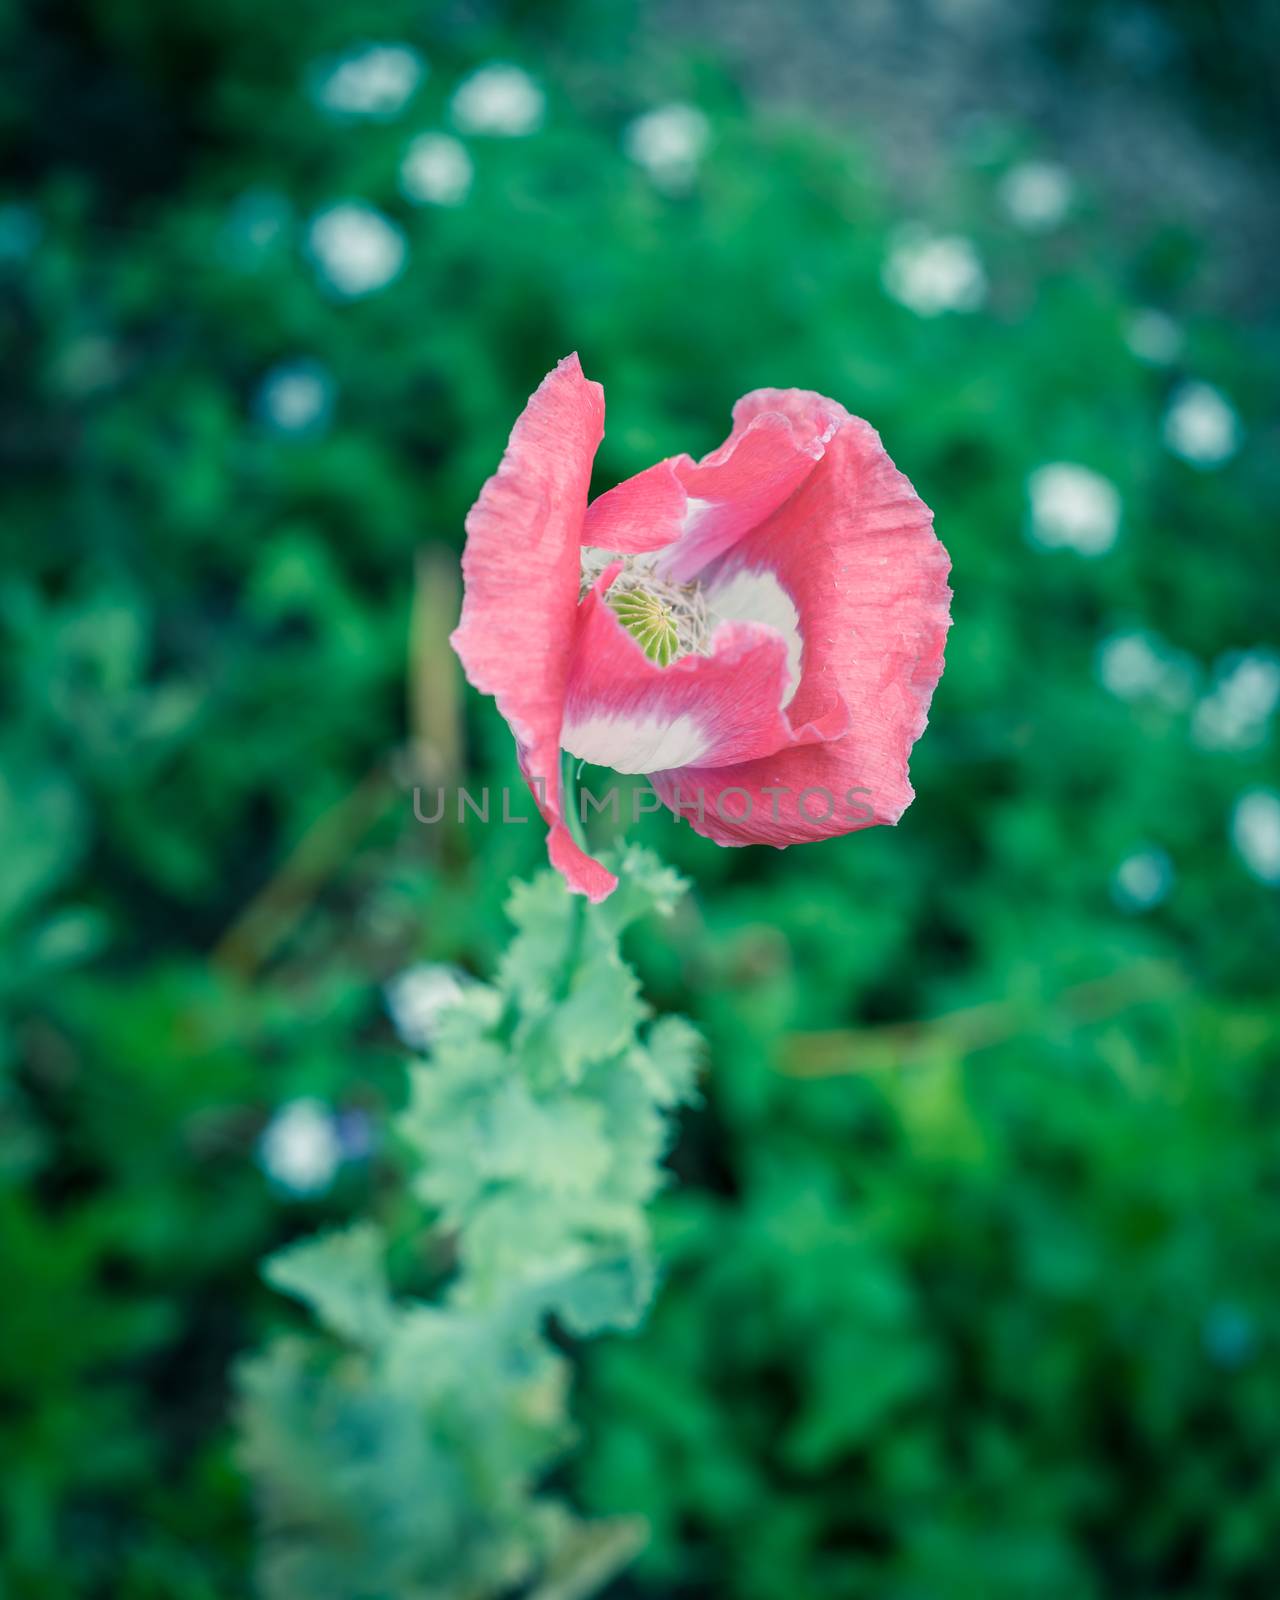 Filtered image beautiful pink and white poppy flower blooming in Texas, USA by trongnguyen